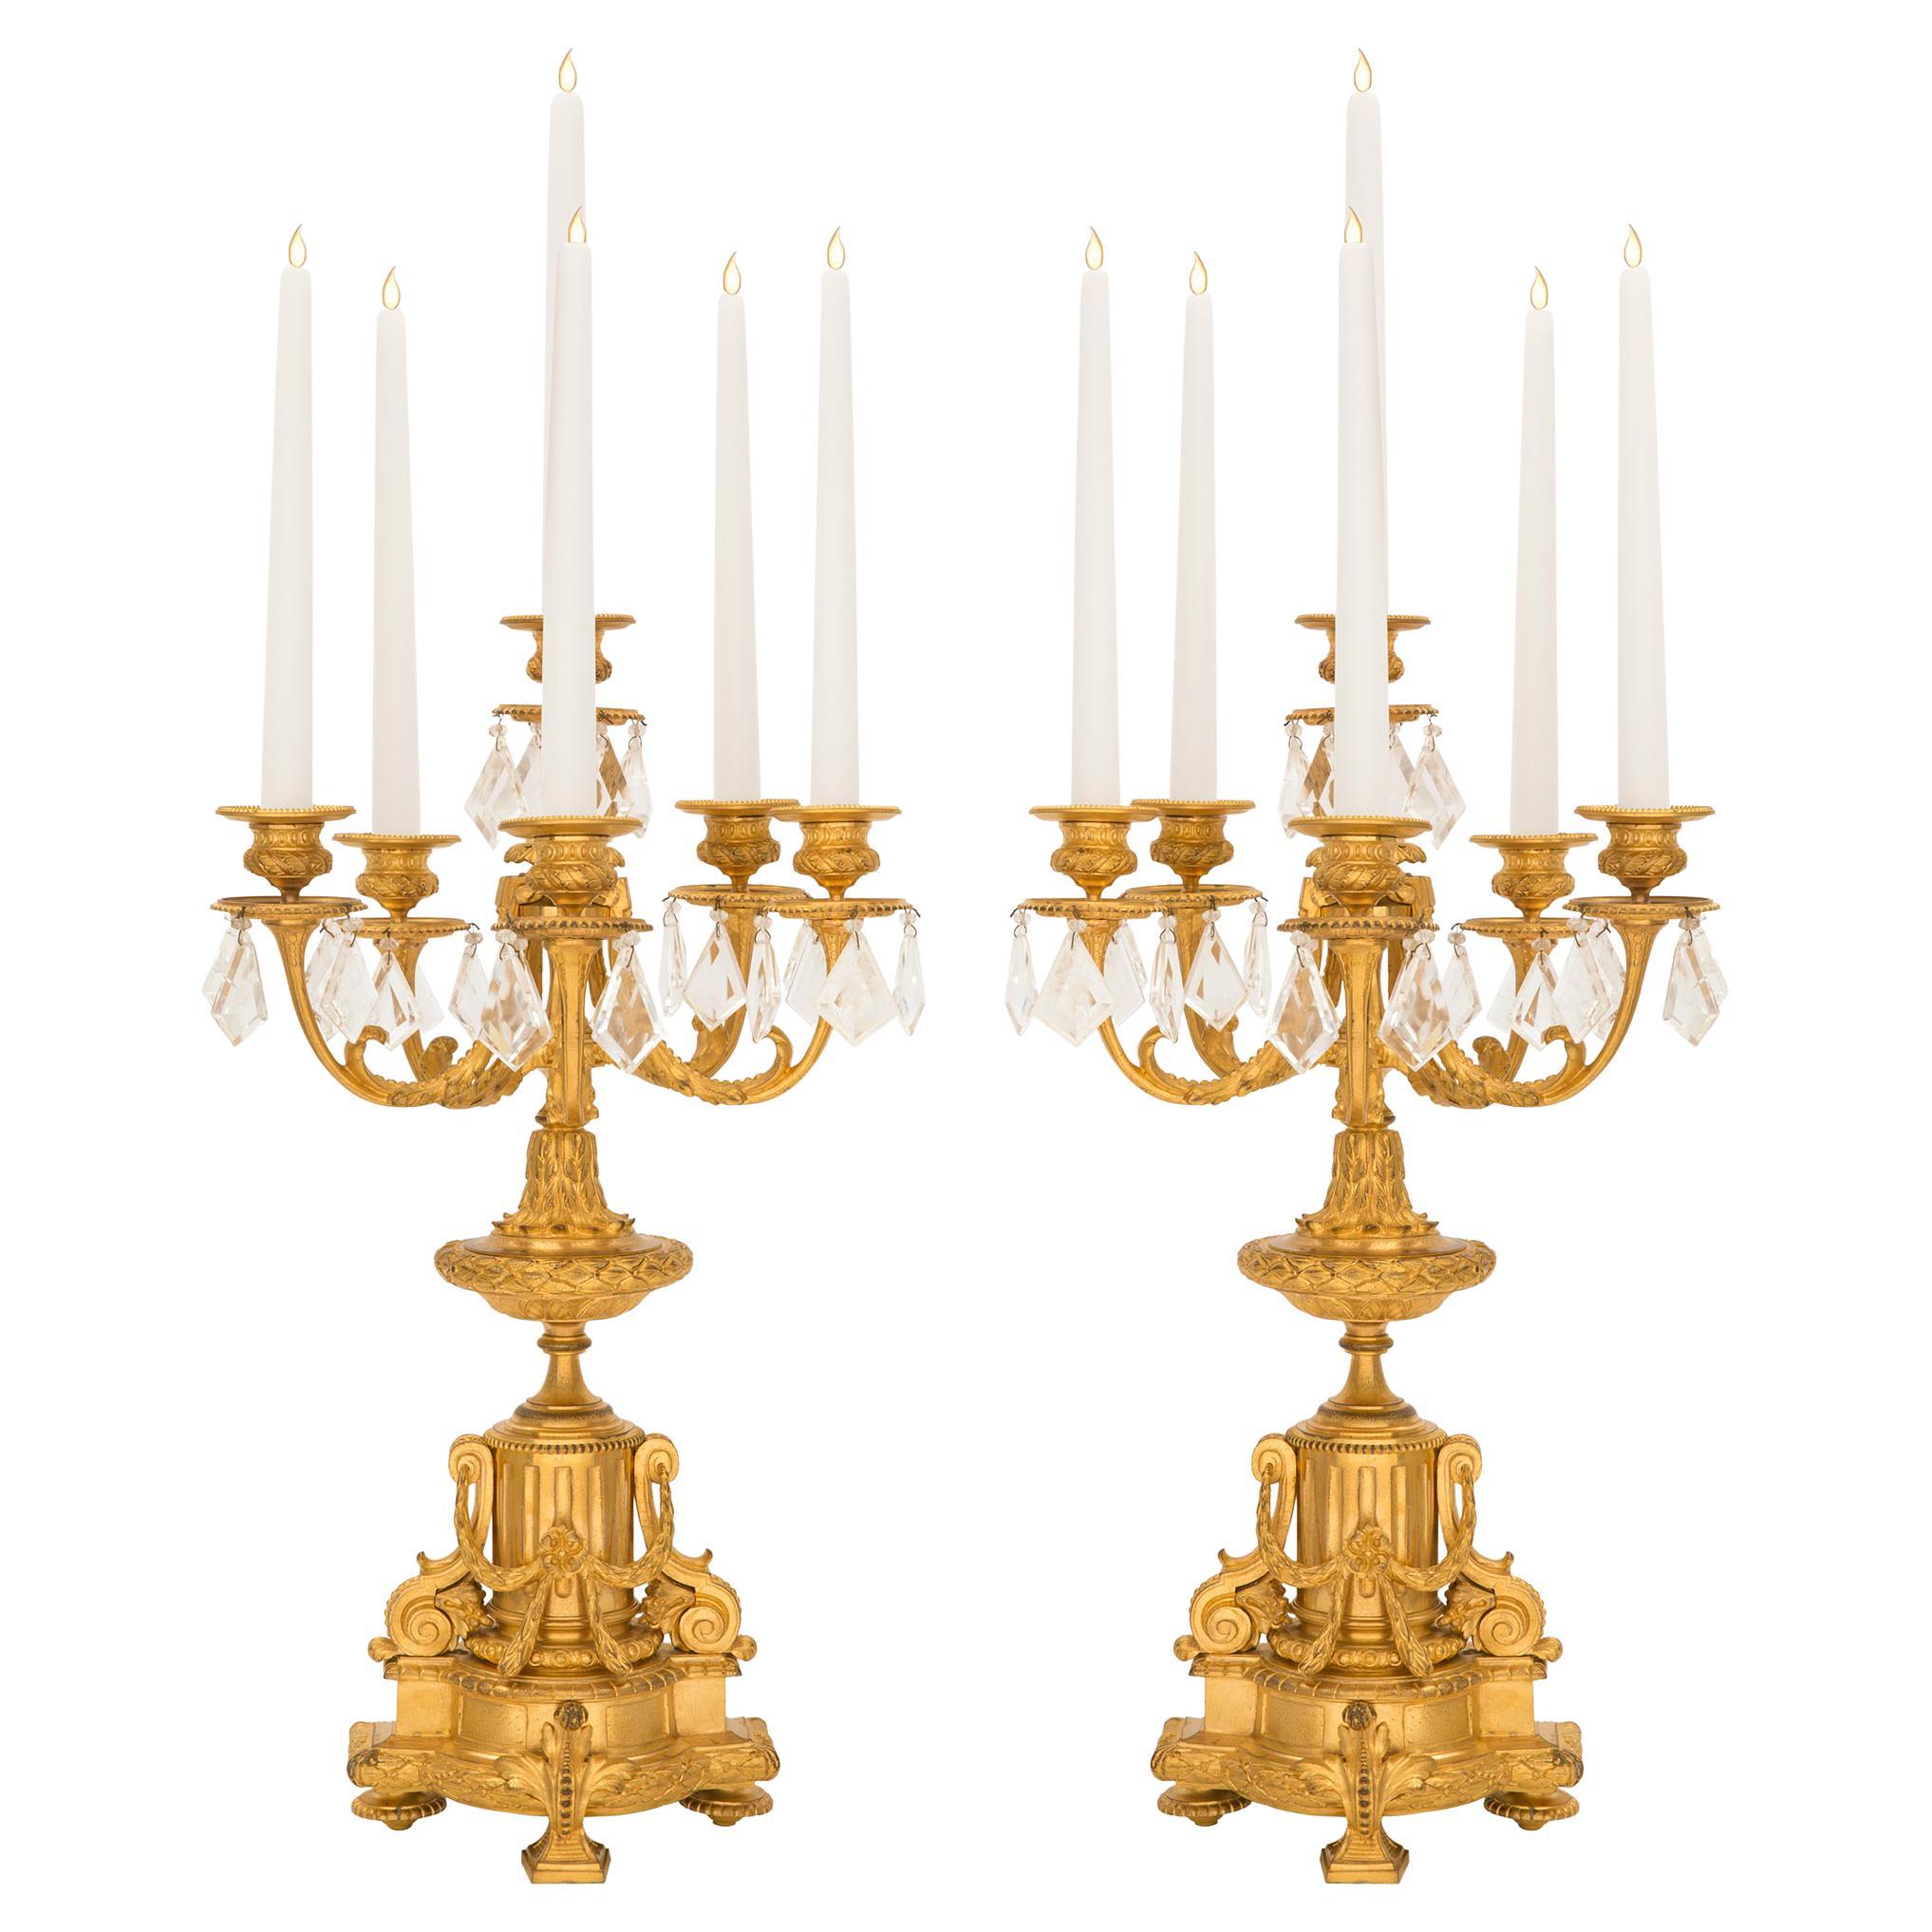 Pair of French Mid-19th Century Louis XVI Style Five Arm Candelabras